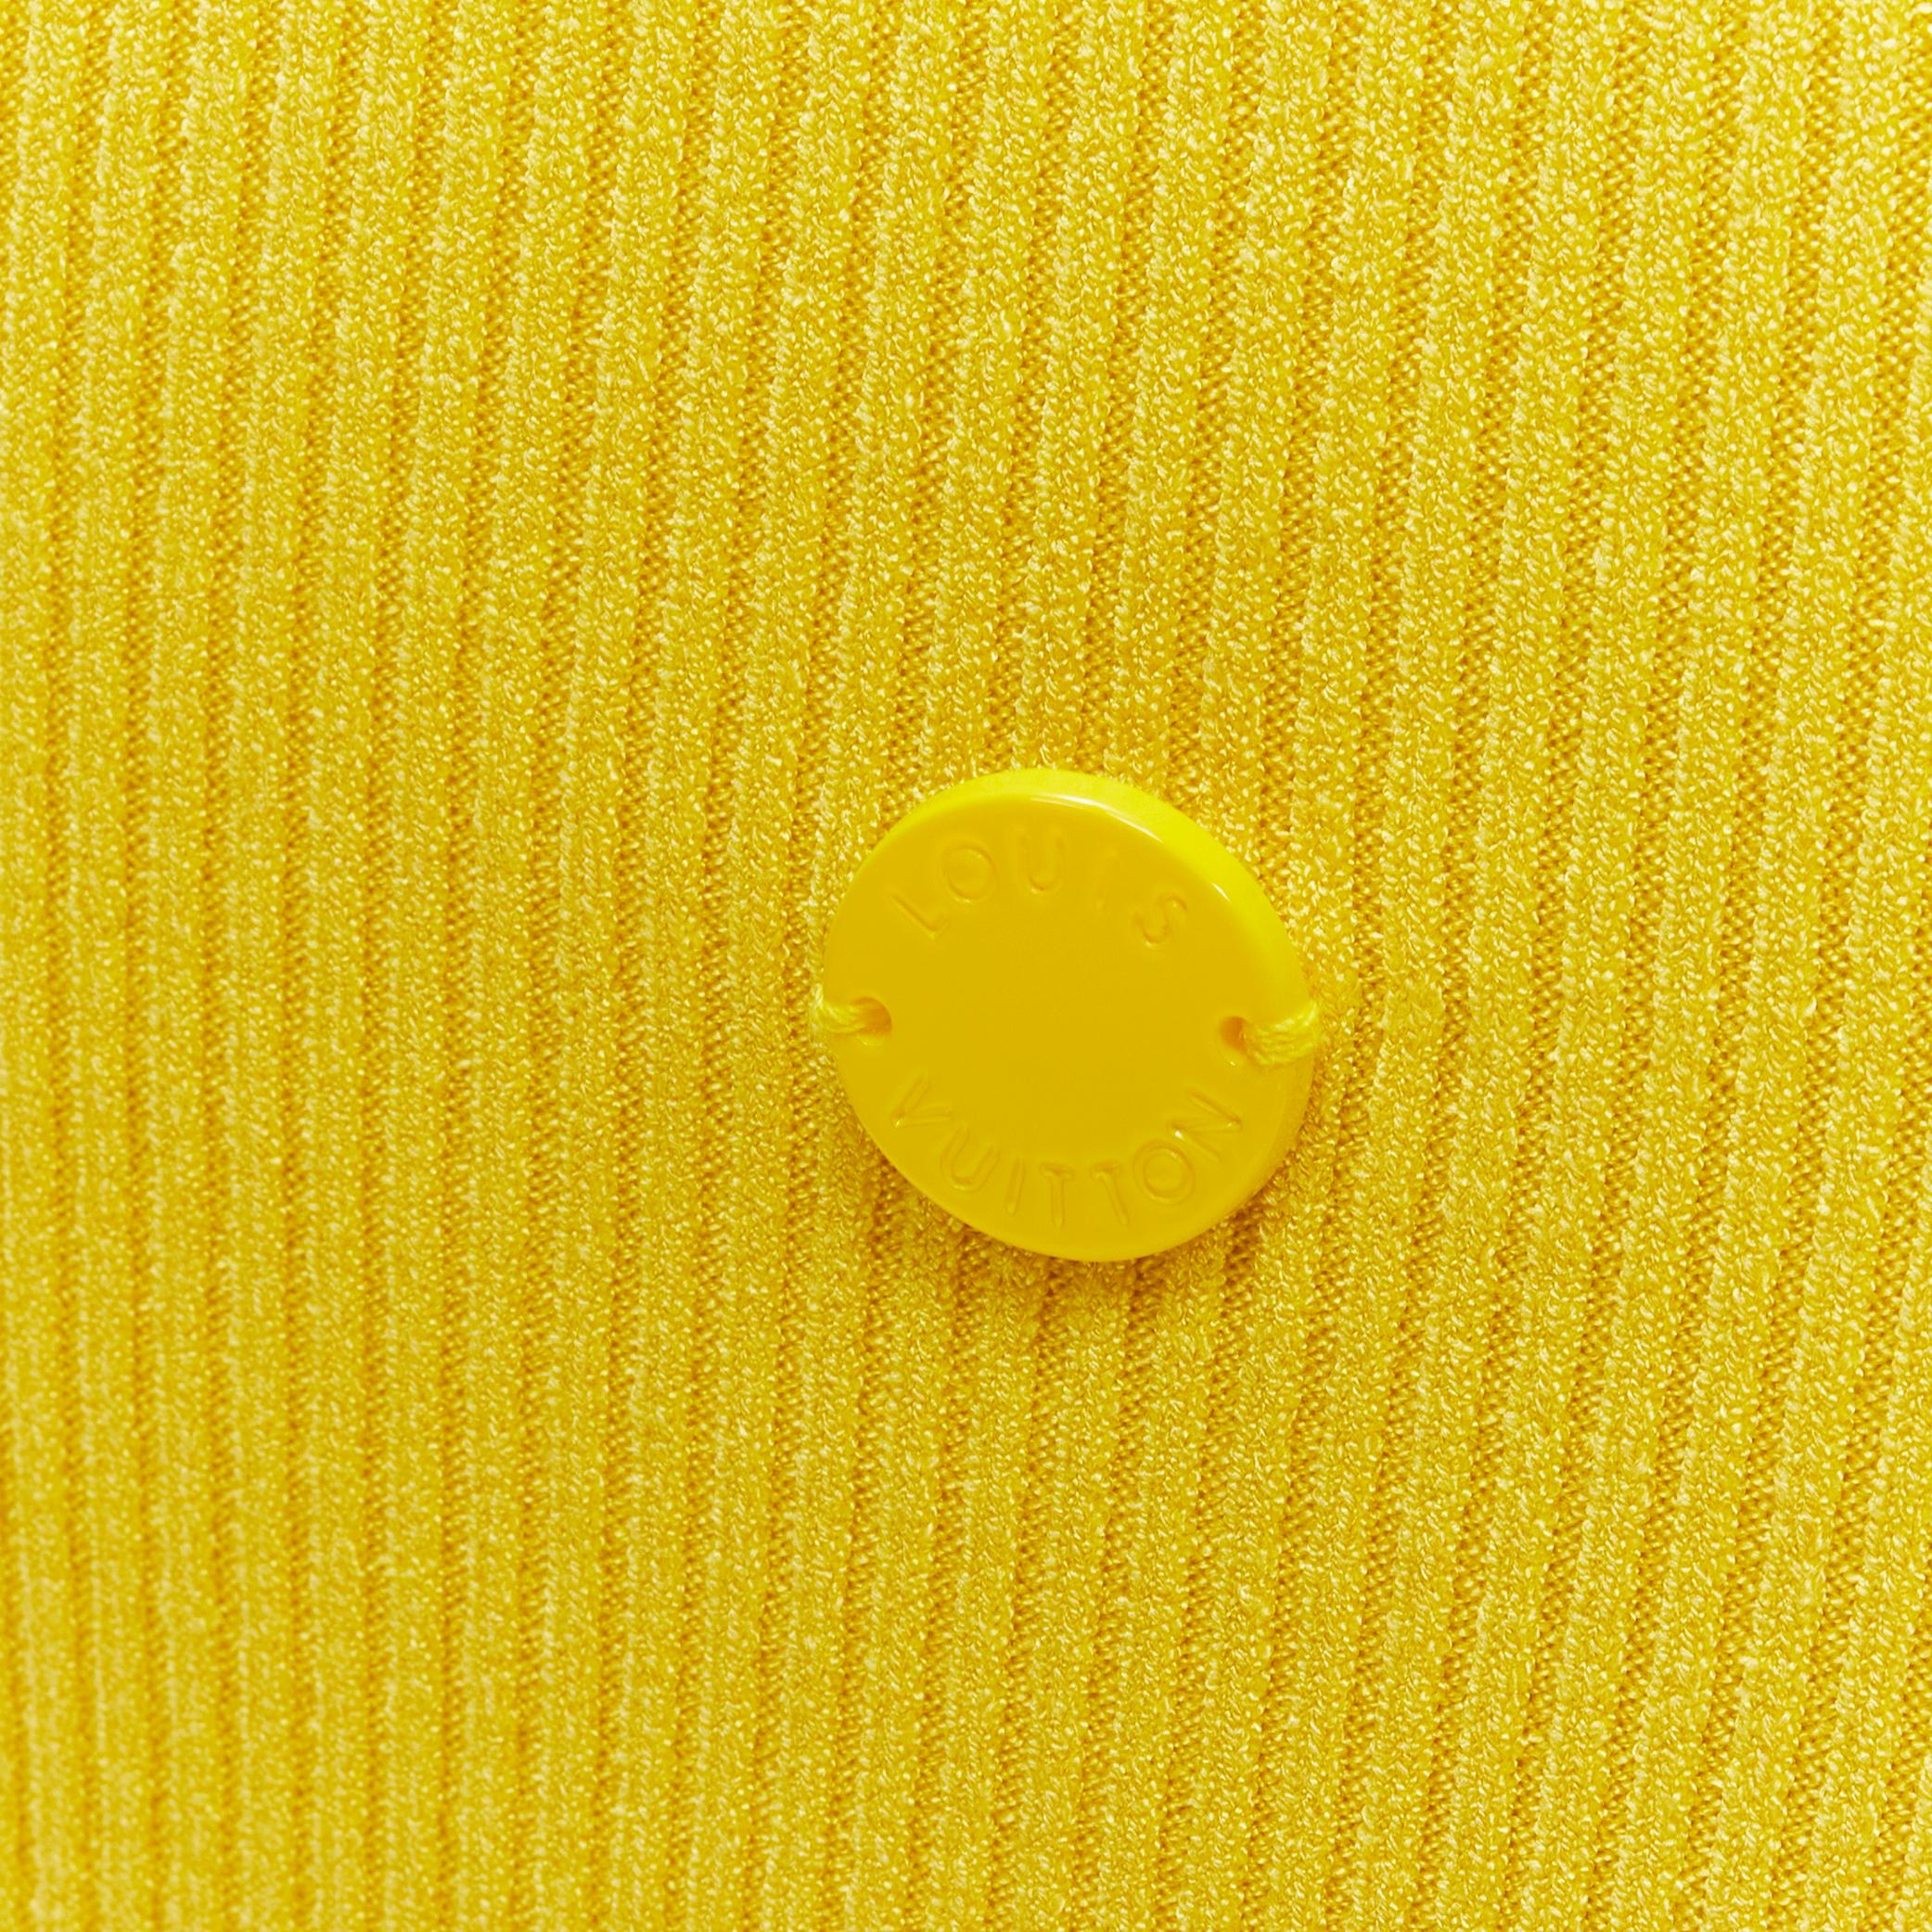 LOUIS VUITTON yellow ribbed knit tonal button charm long sleeve top XS
Brand: Louis Vuitton
Material: Feels like cotton
Color: Yellow
Pattern: Solid
Extra Detail: LV logo button charm at front hem.

CONDITION:
Condition: Excellent, this item was